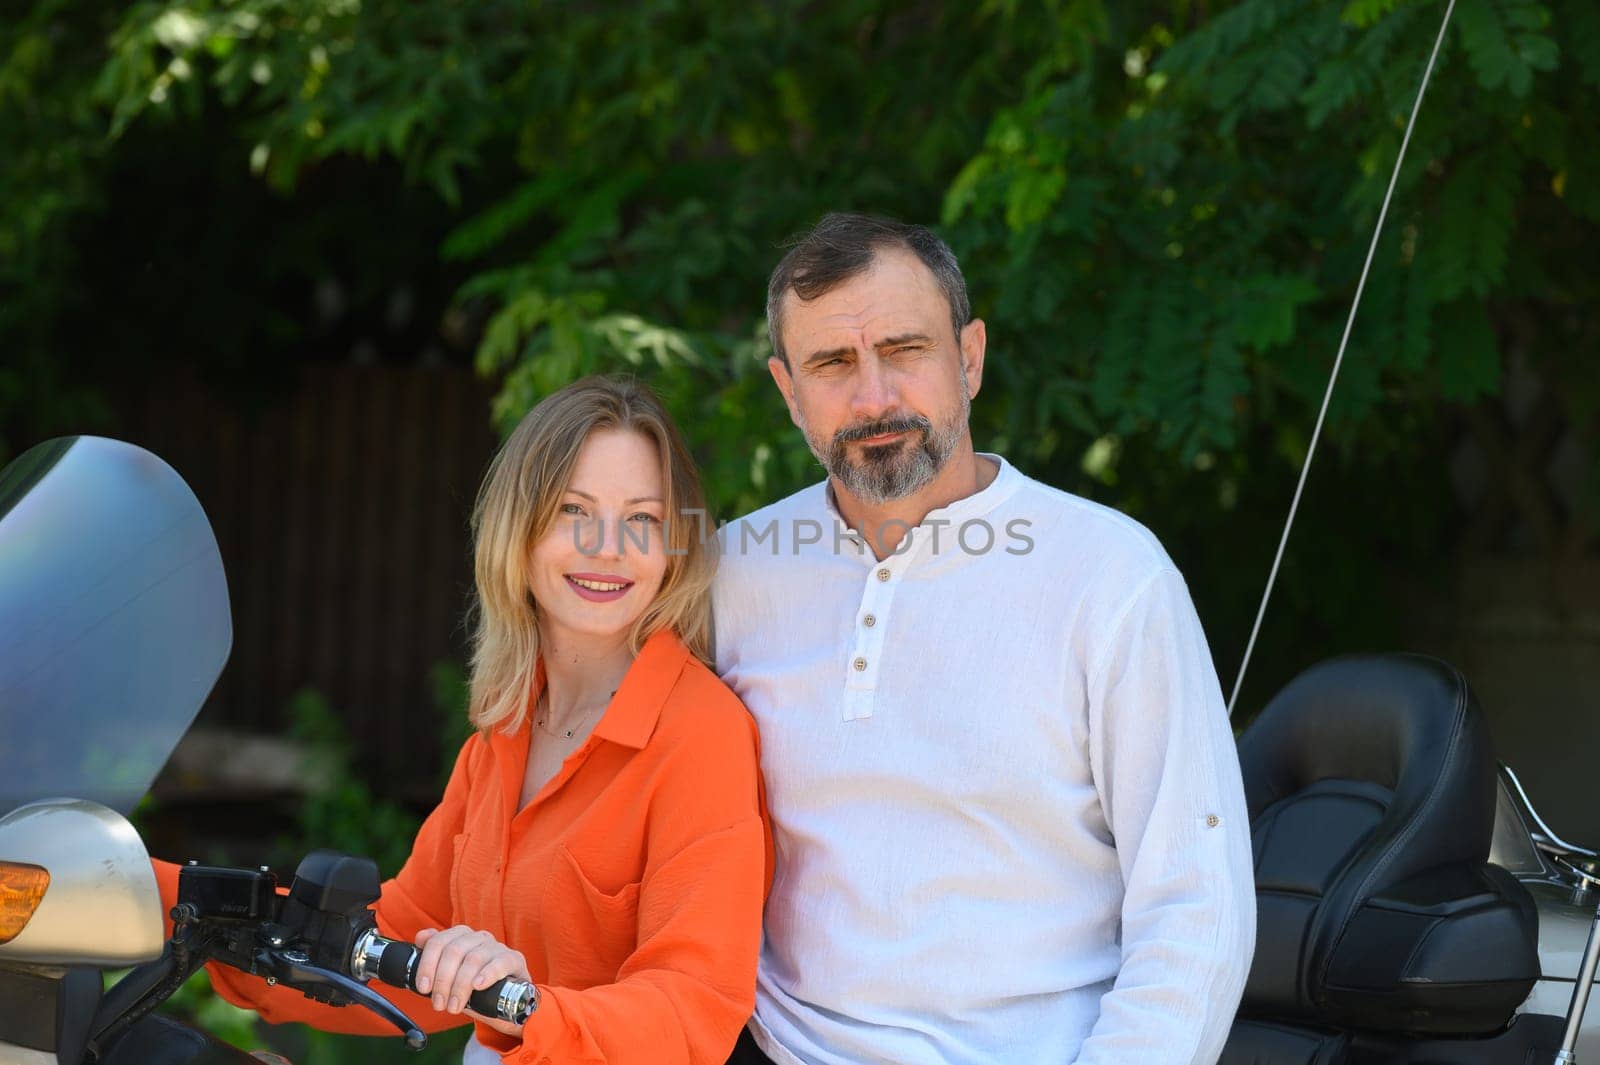 happy husband and wife near a motorcycle 2 by Mixa74